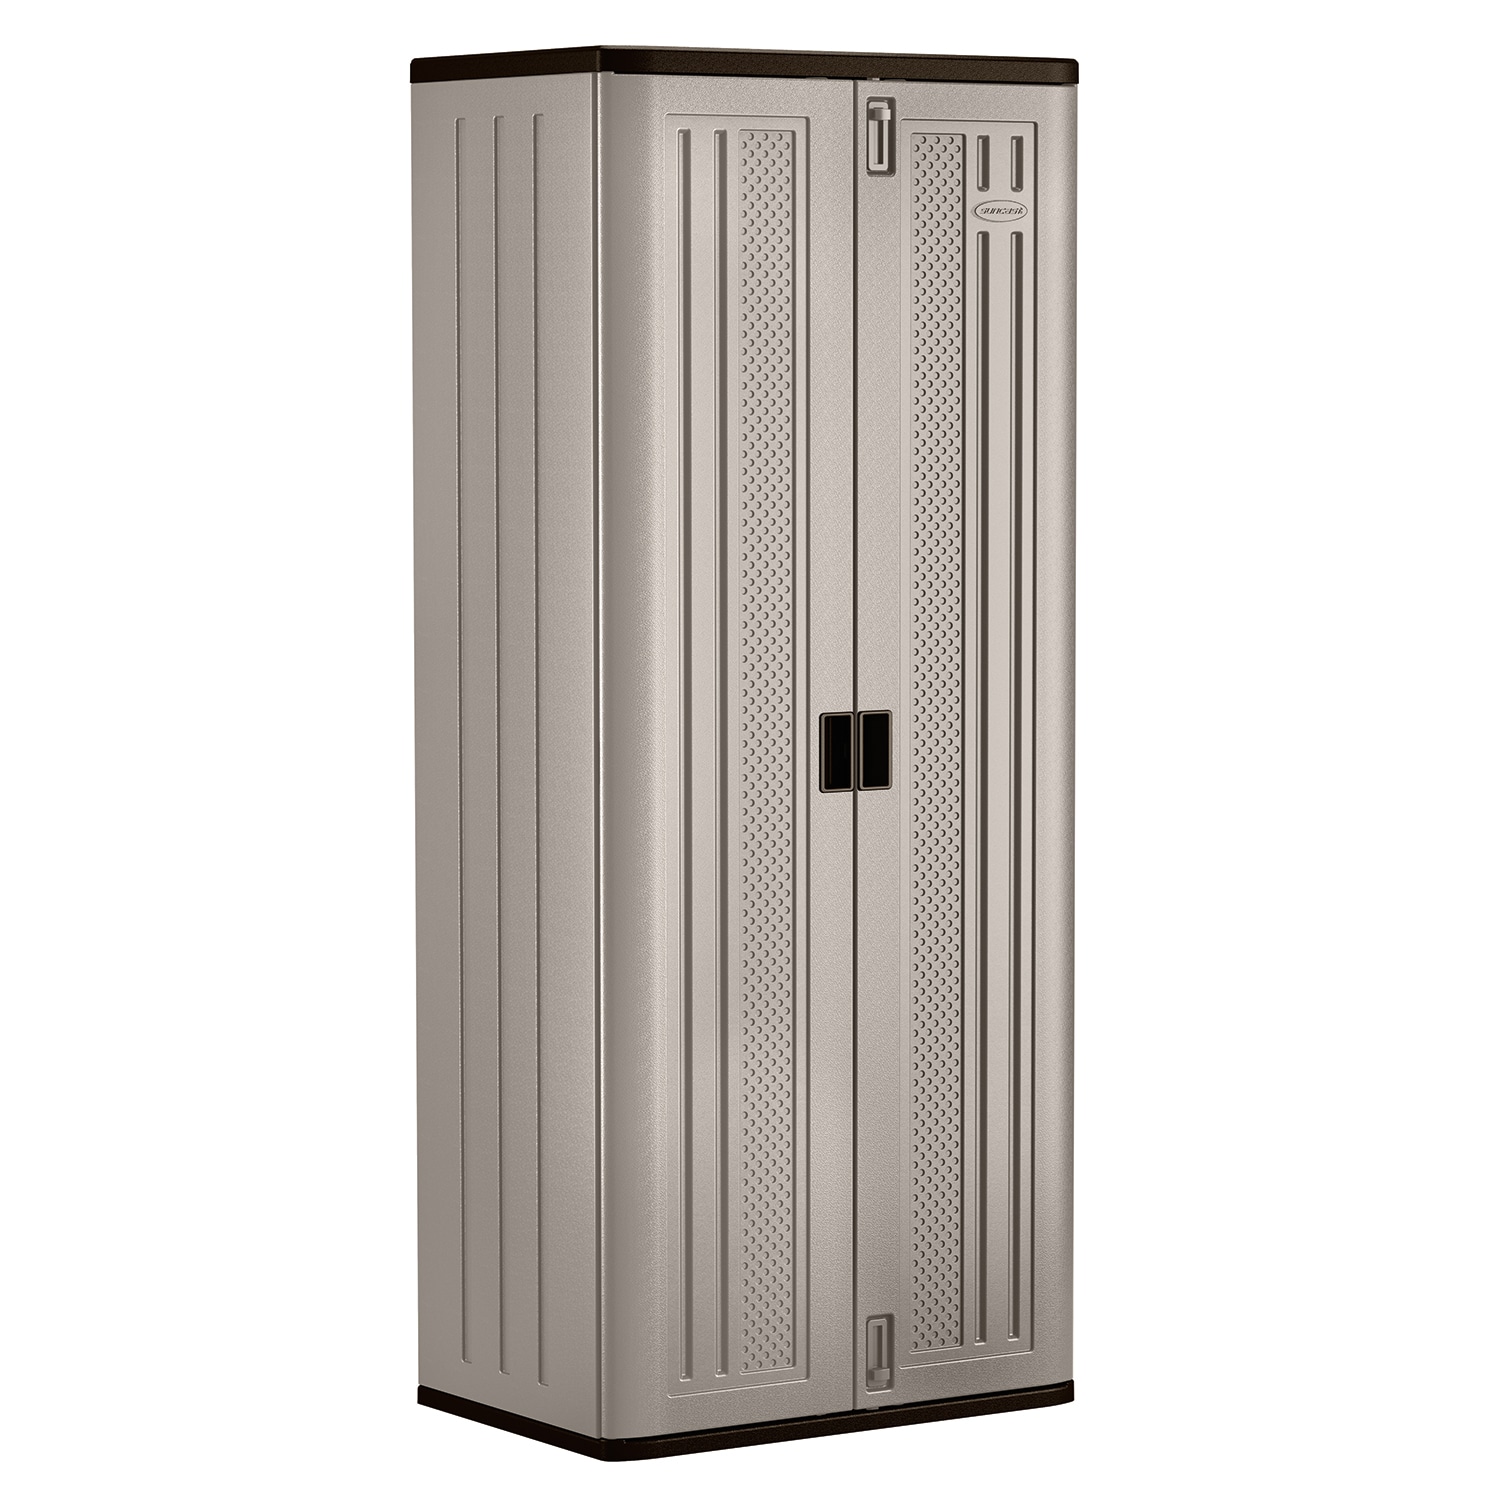 Keter Utility Cabinets Plastic Freestanding Garage Cabinet in Gray (27-in W x 38.58-in H x 14.75-in D)